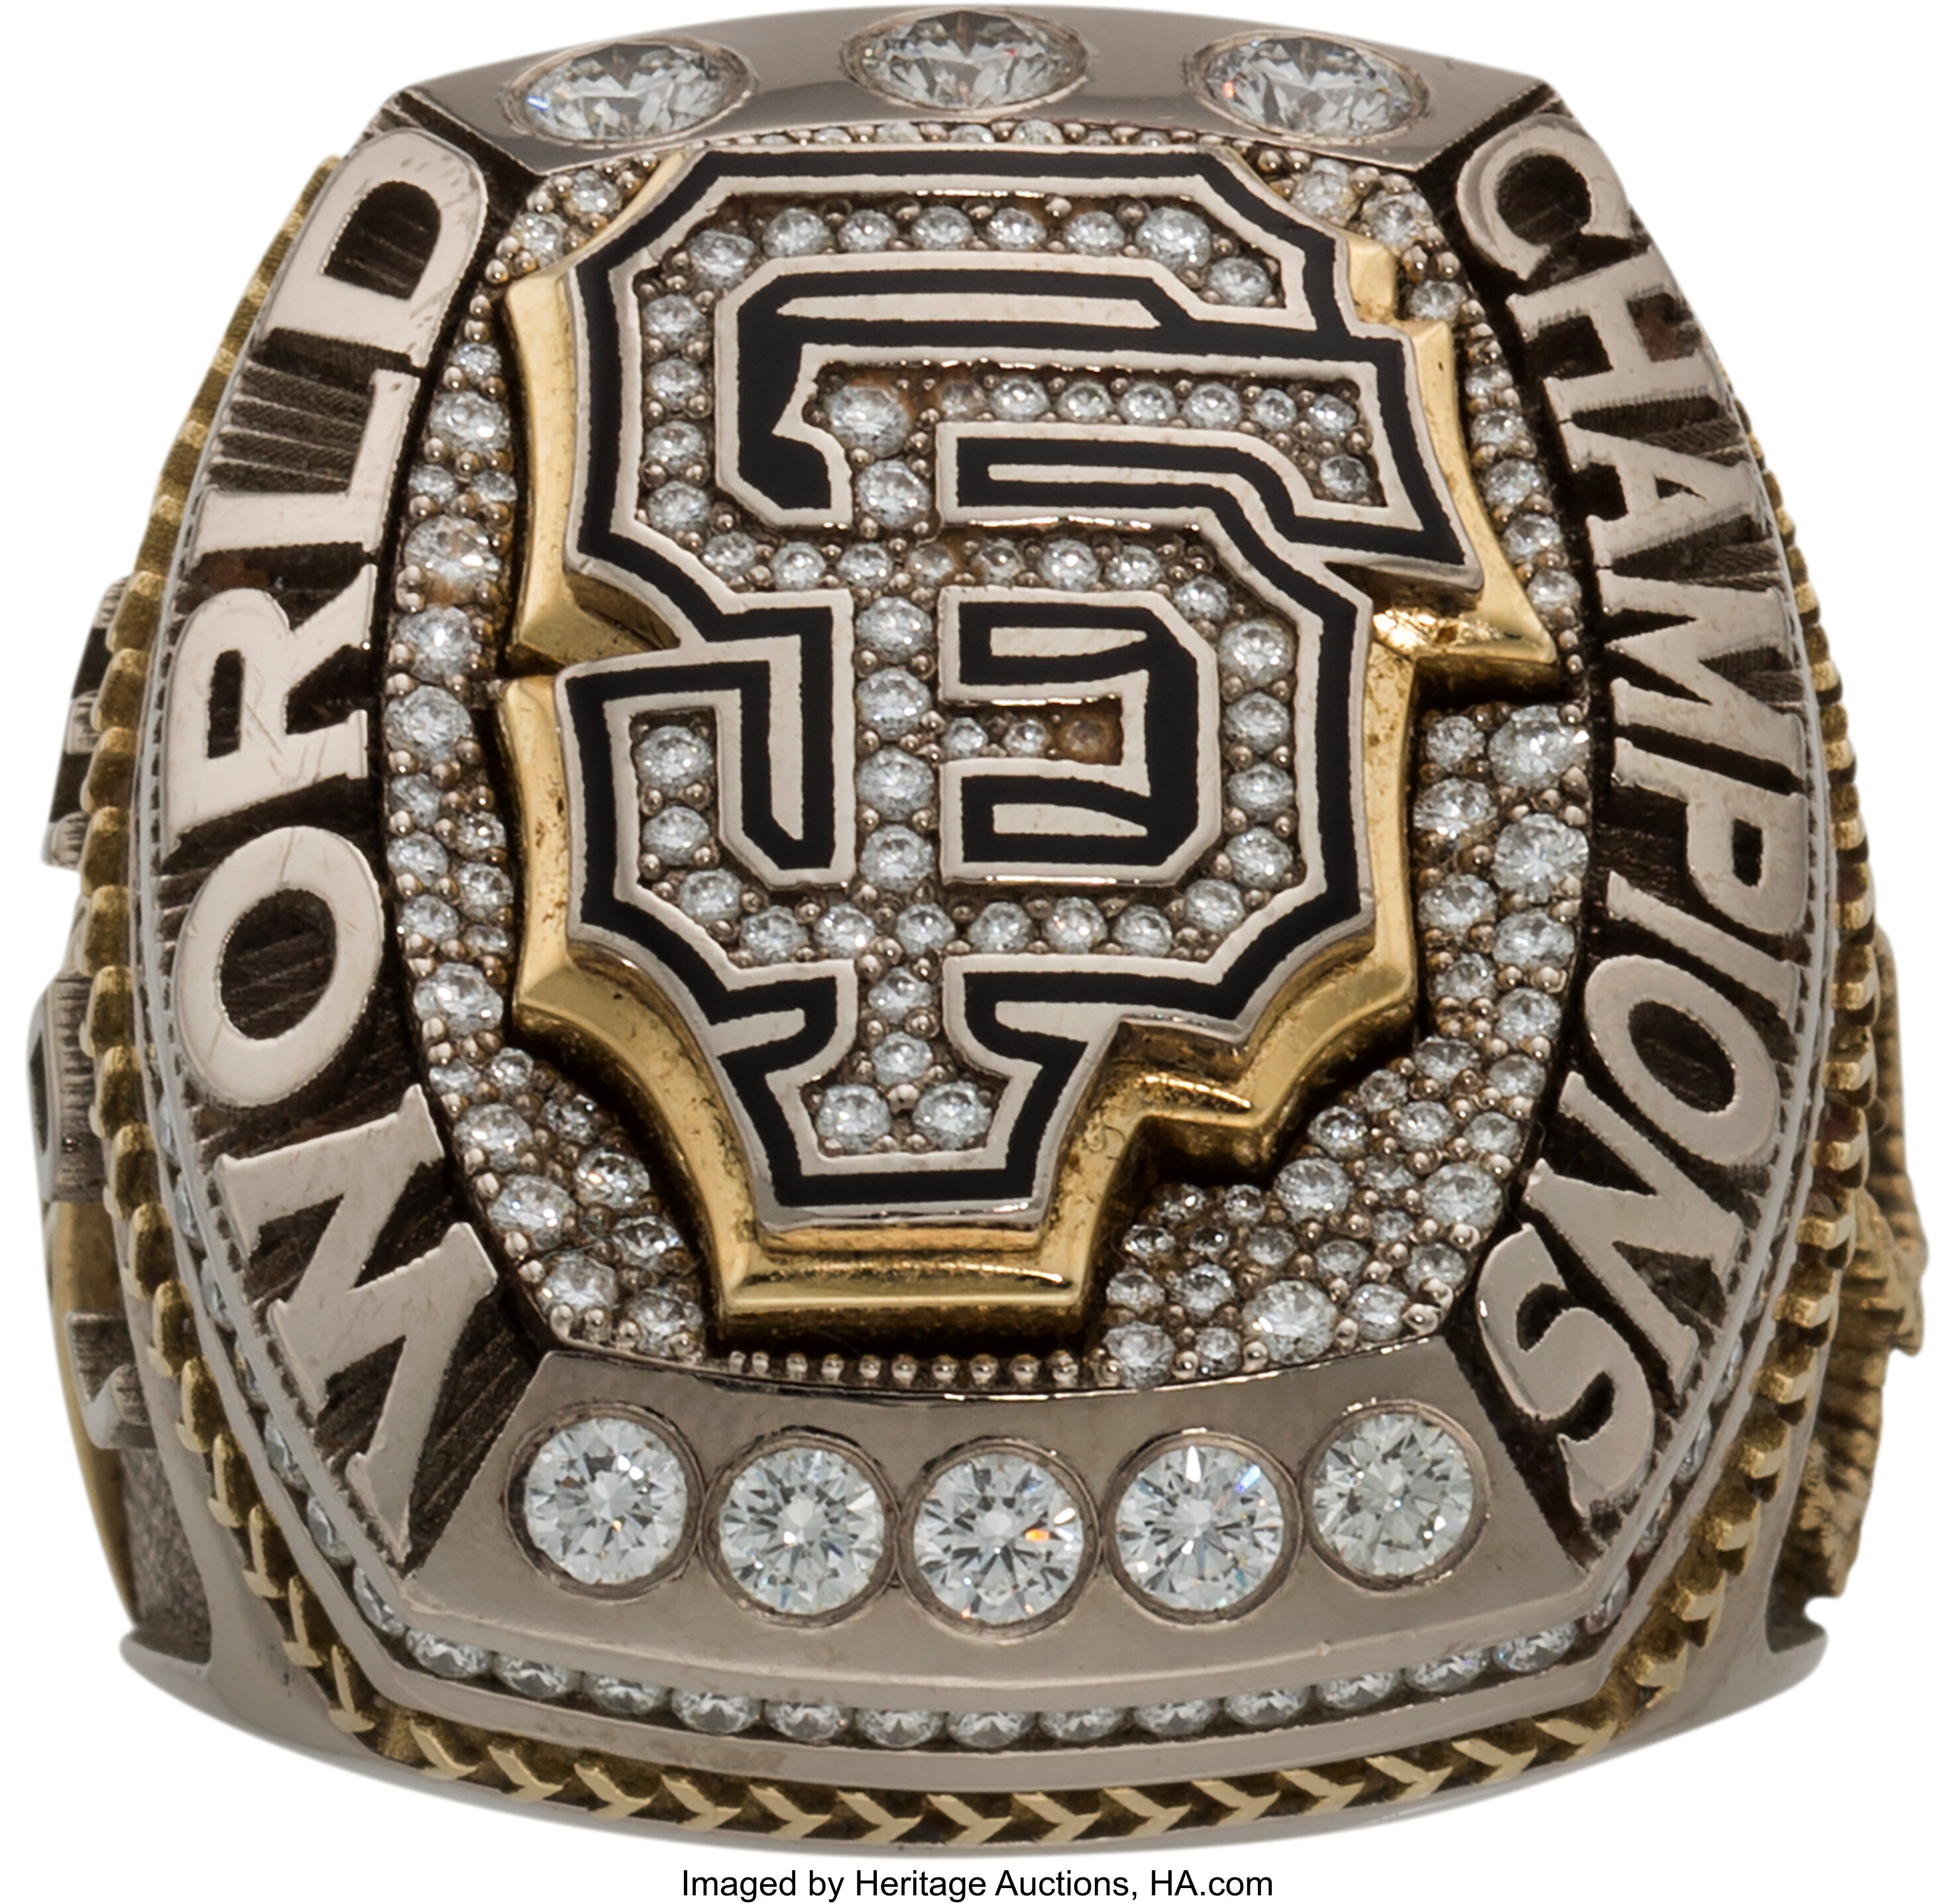 Gold Edition SF Giants Uniform for the 2014 Ring Ceremony